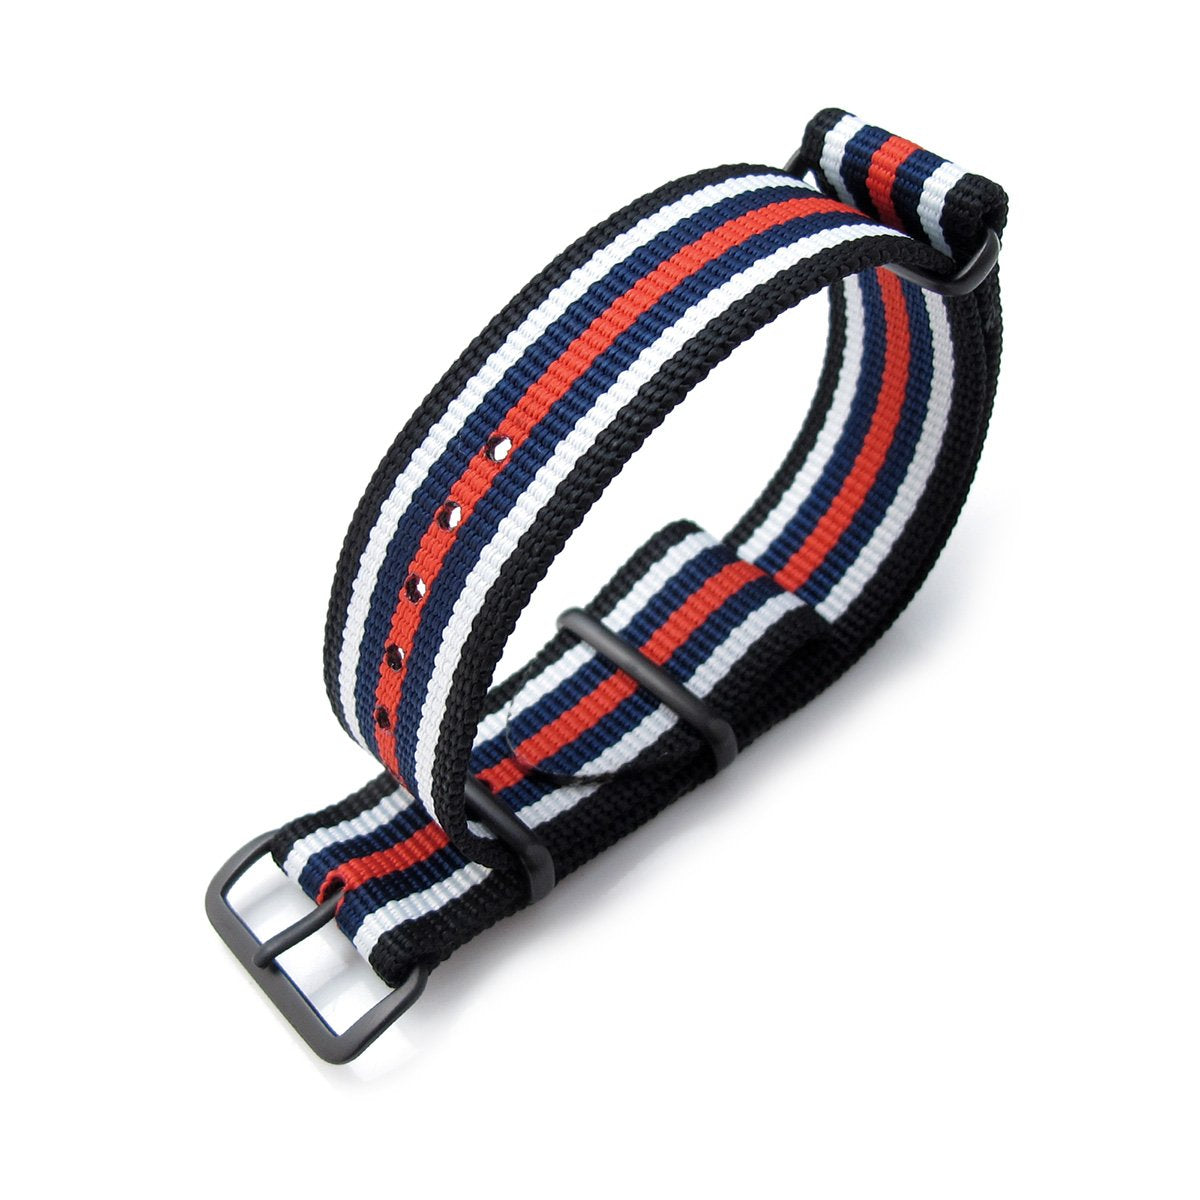 MiLTAT 21mm or 22mm G10 NATO Bullet Tail Watch Strap Ballistic Nylon PVD Black White Blue &amp; Red Stripes Strapcode Watch Bands